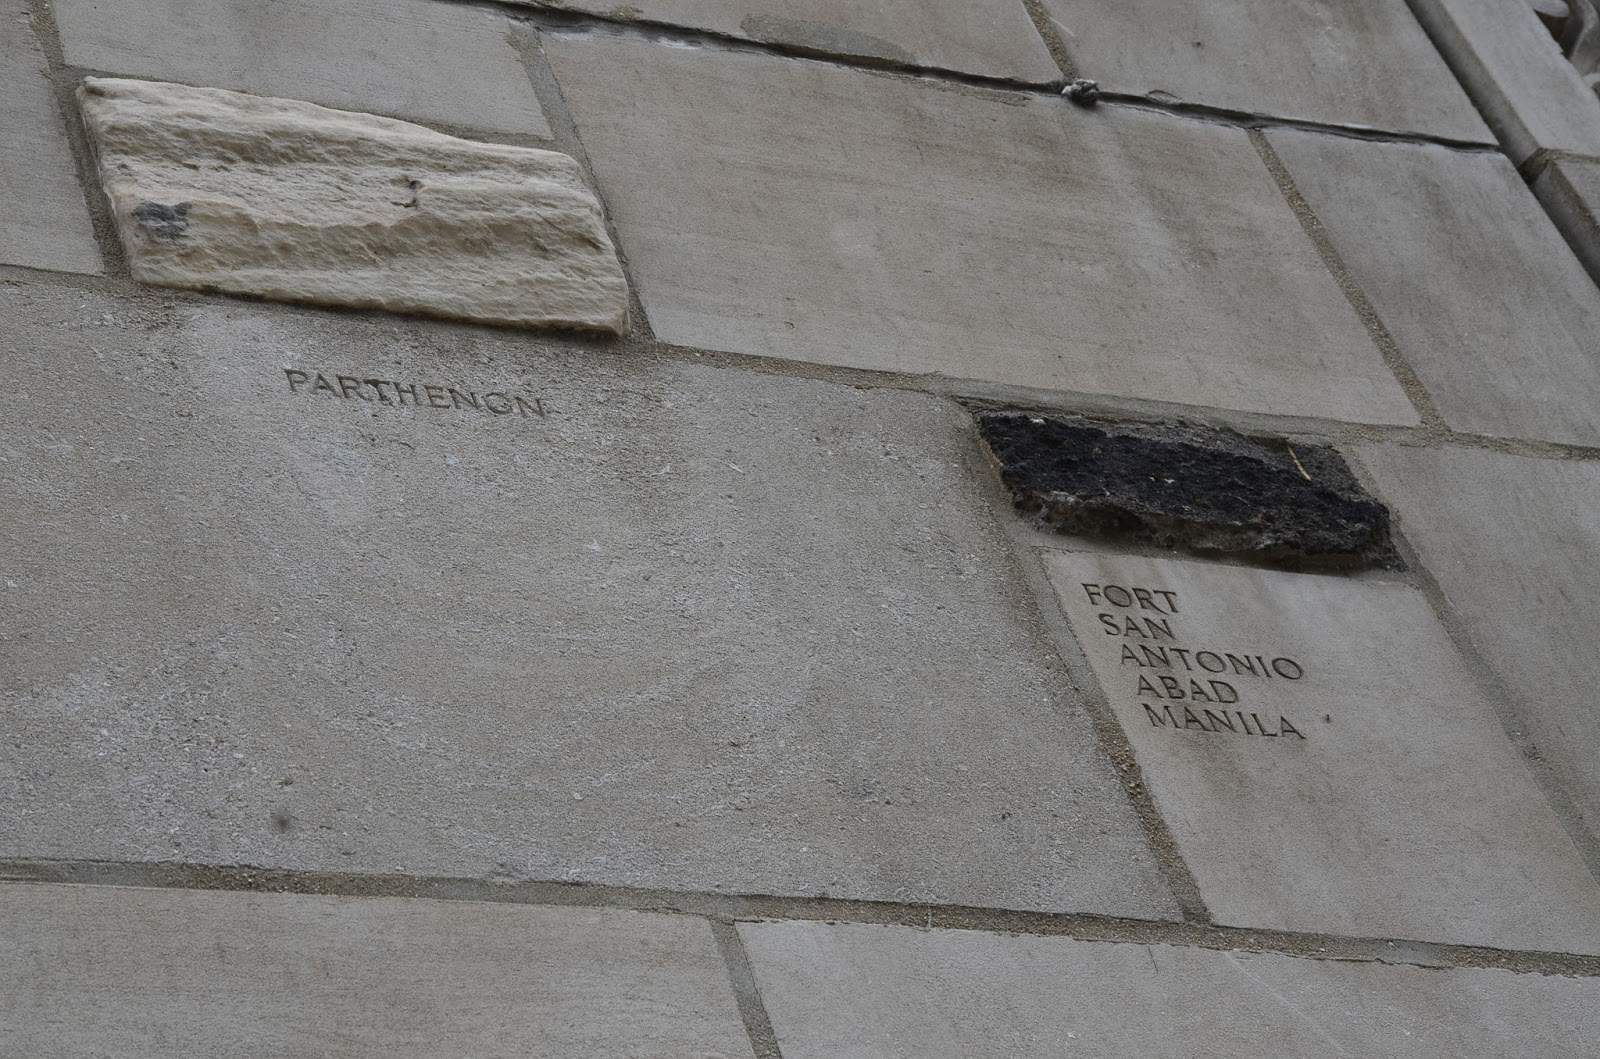 Parthenon in Athens, Greece (left) and Fort San Antonio Abad in Manila, Philippines (right) on the Tribune Tower in Chicago